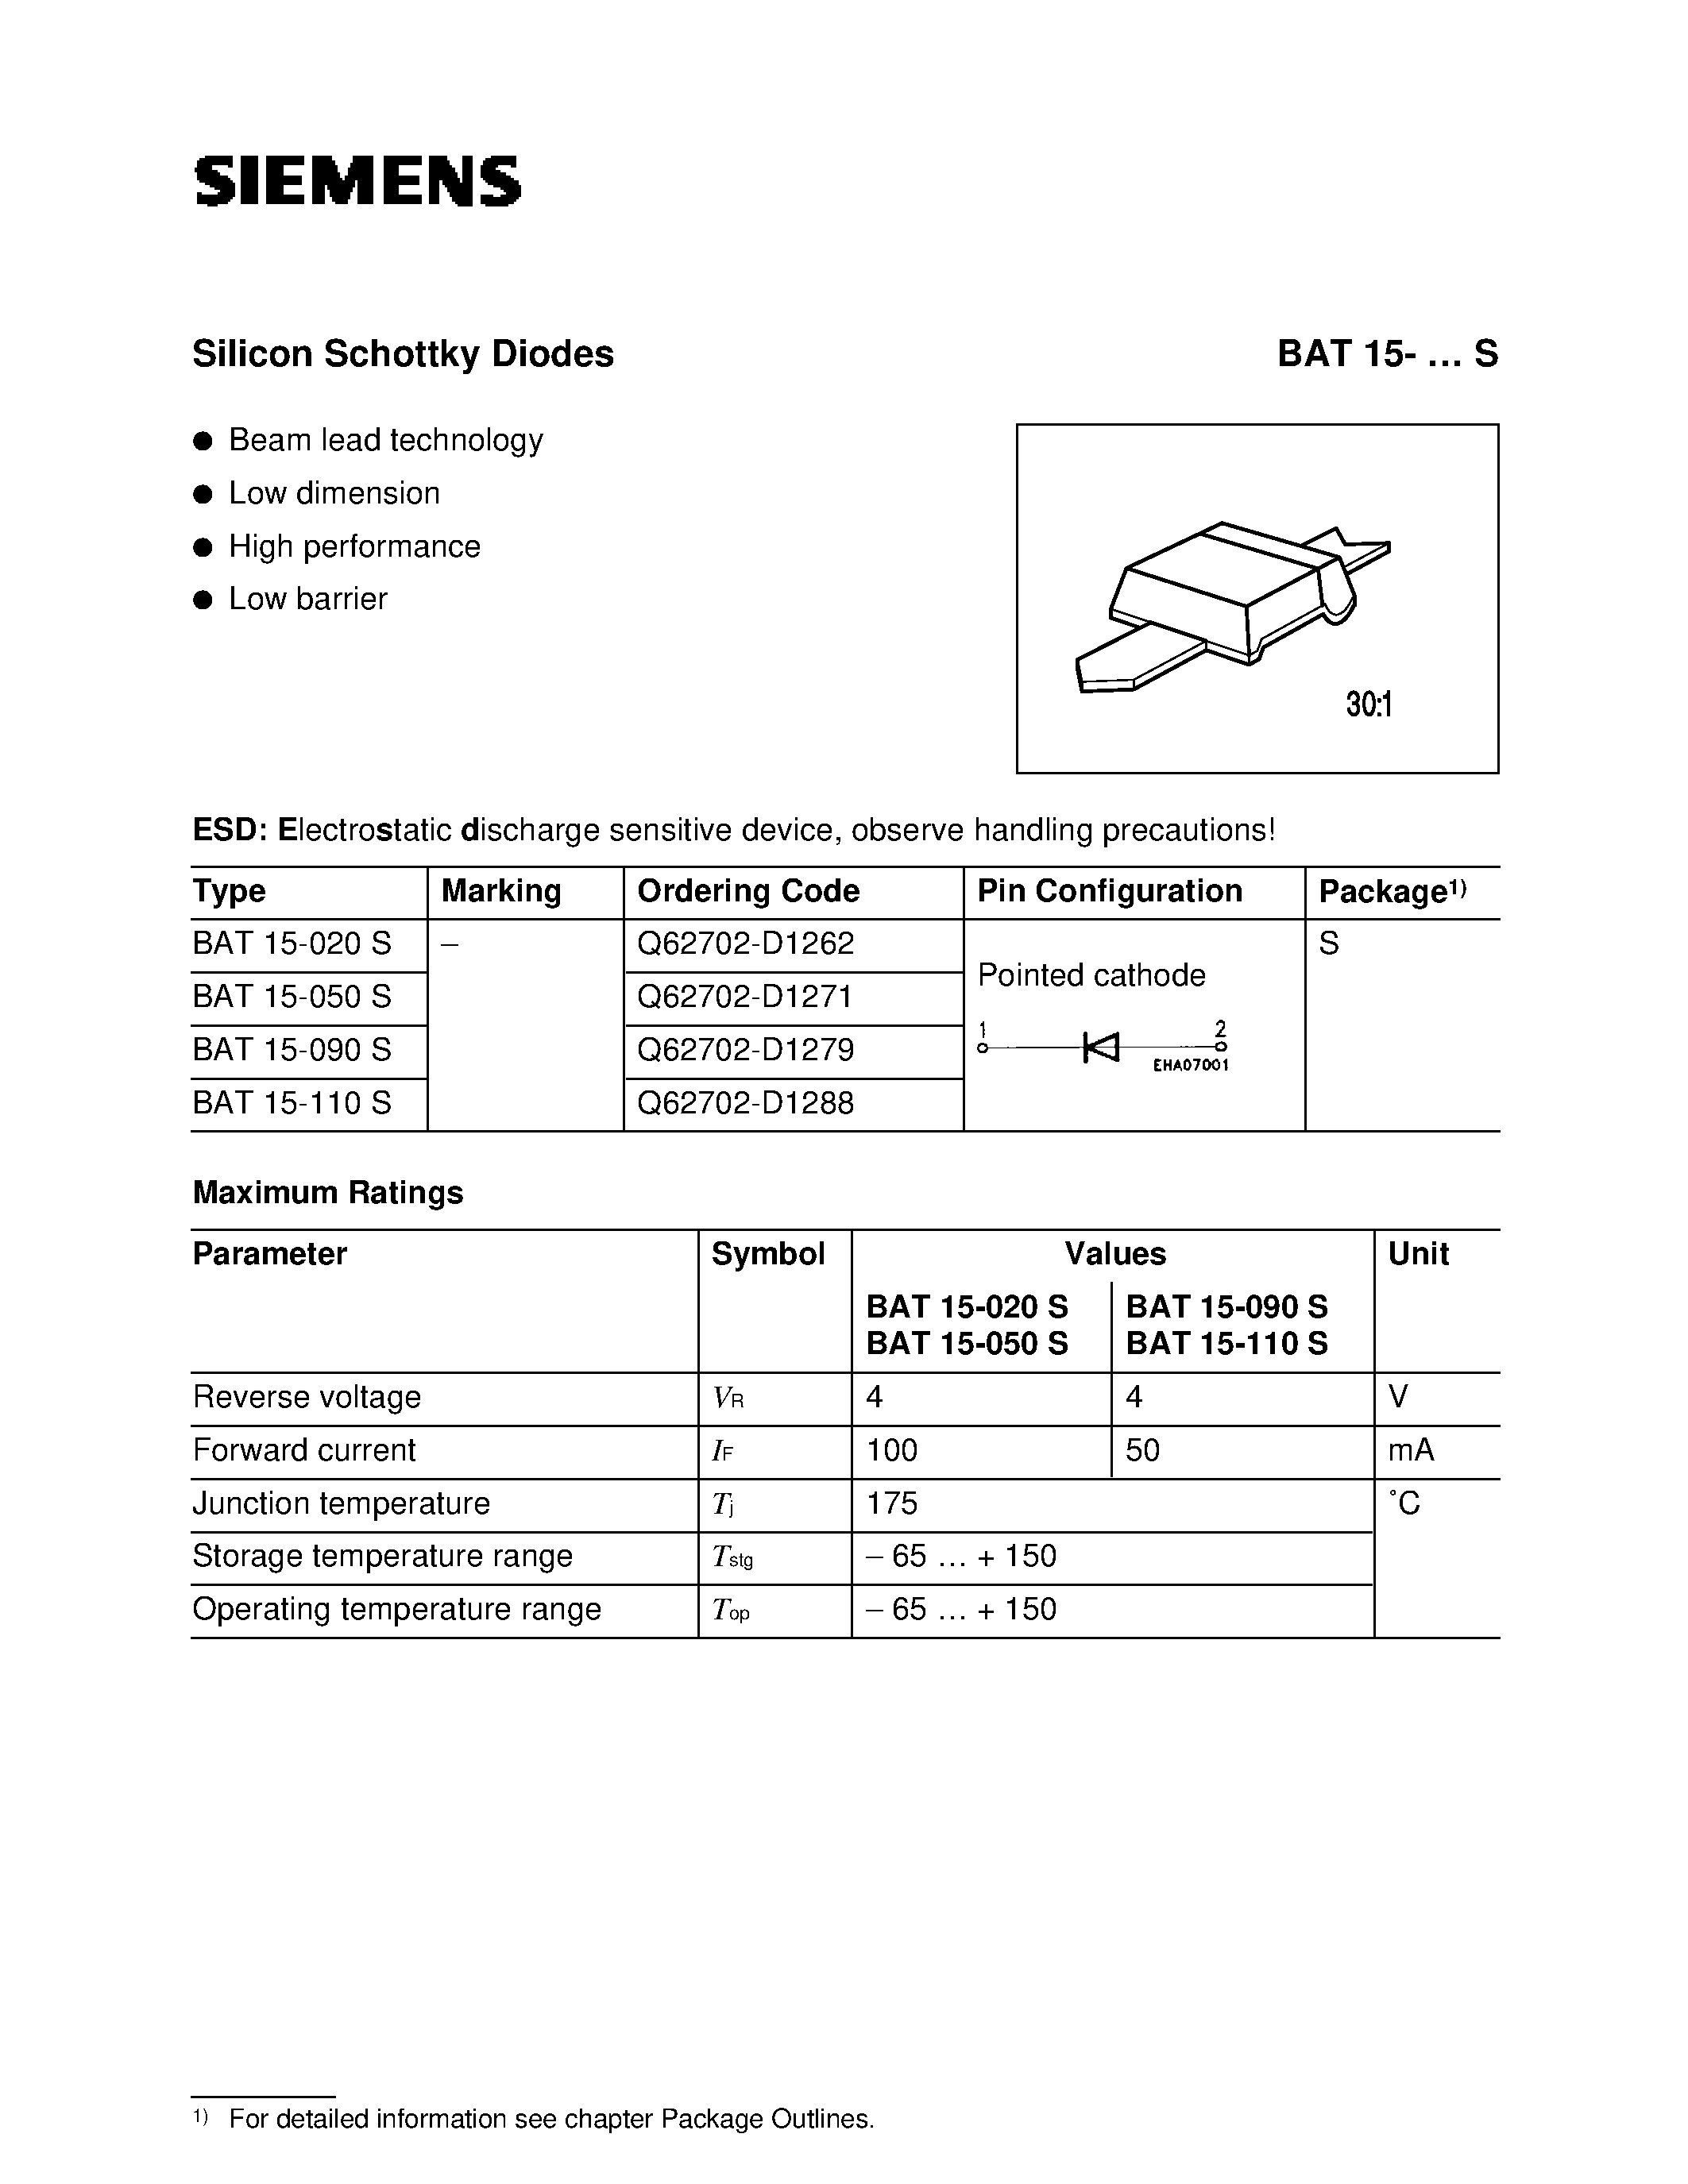 Datasheet BAT15-090S - Silicon Schottky Diodes (Beam lead technology Low dimension High performance Low barrier) page 1